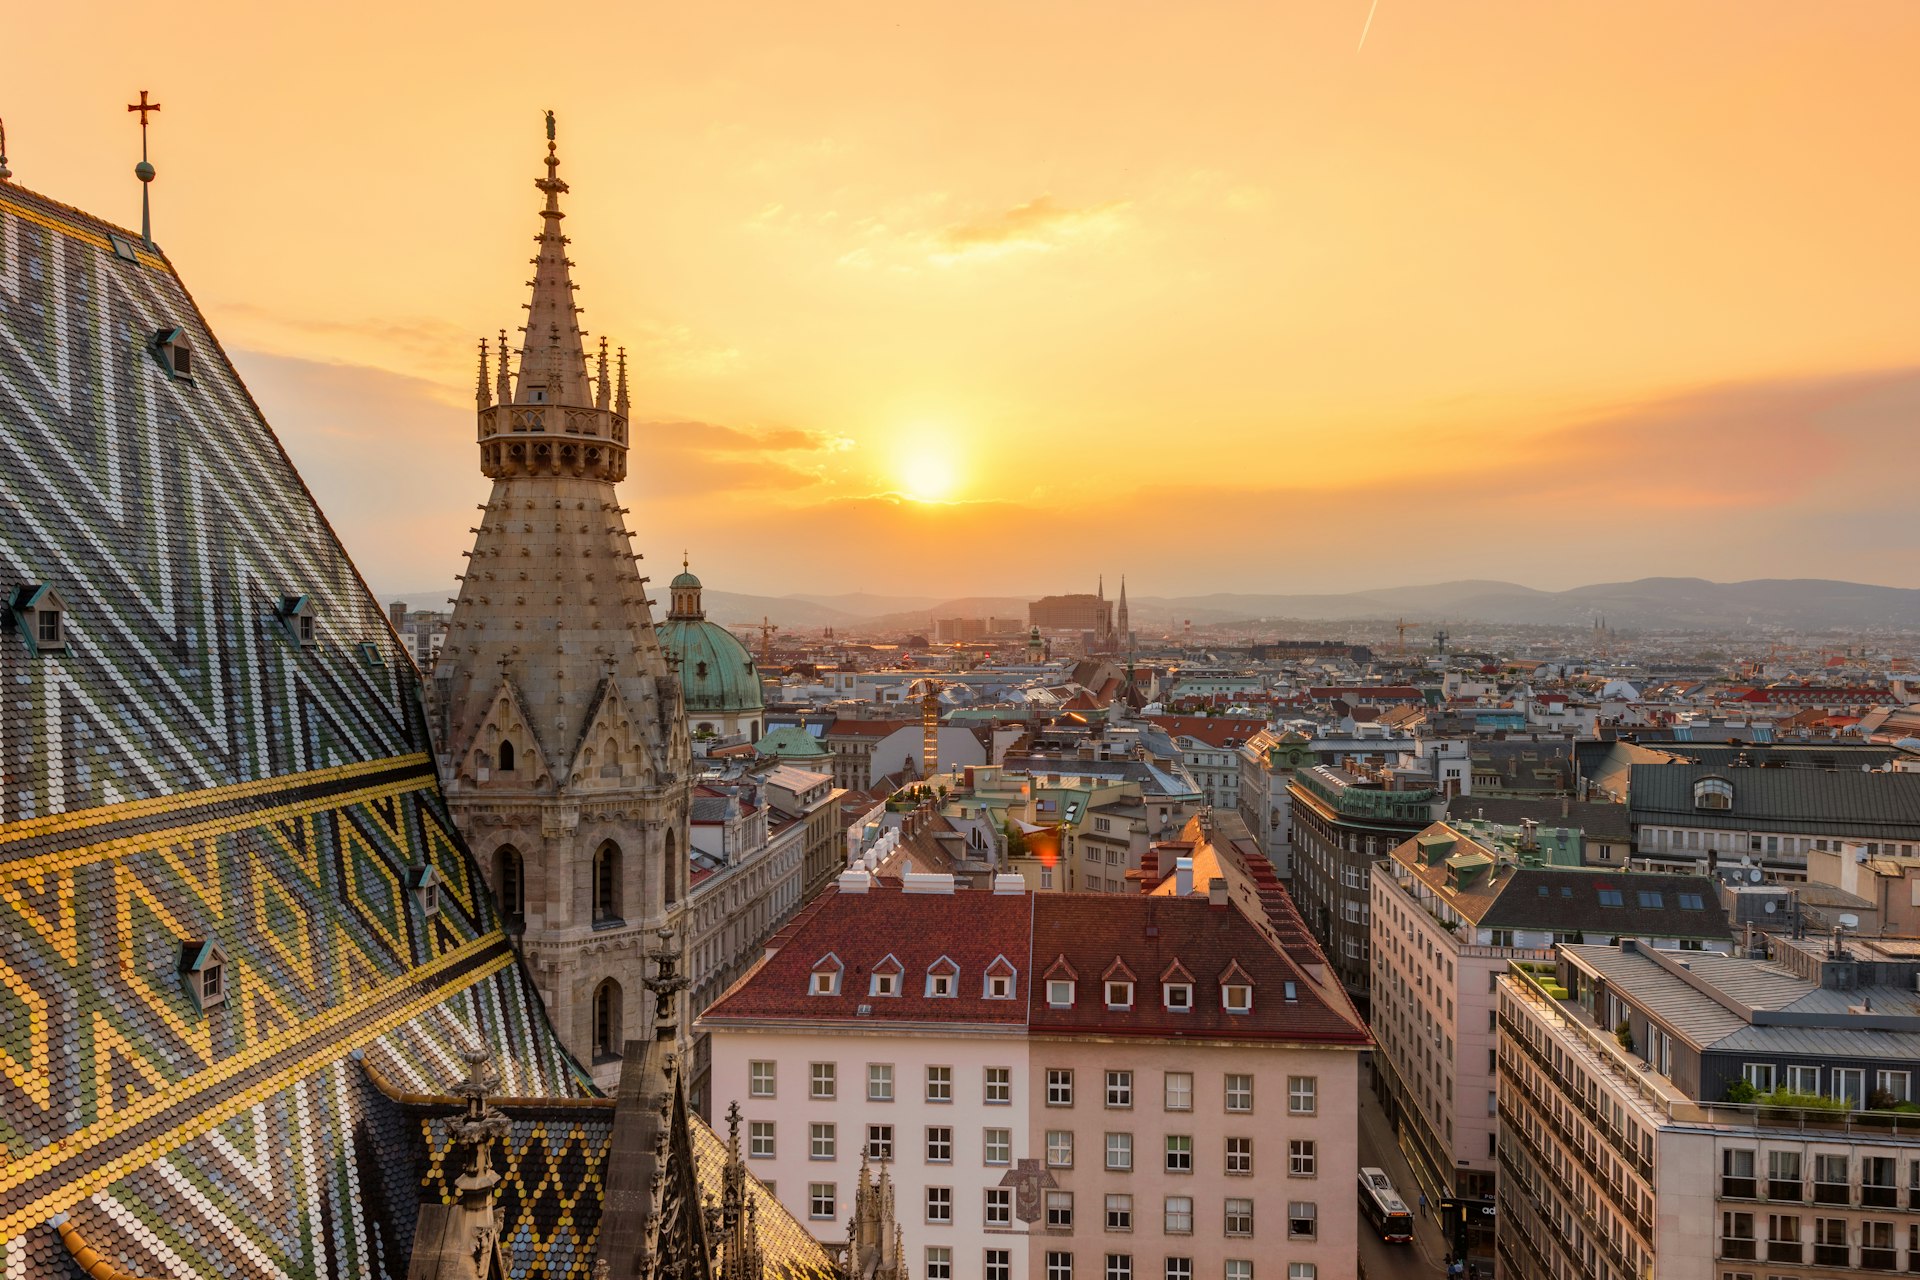 A view over Vienna's architecture